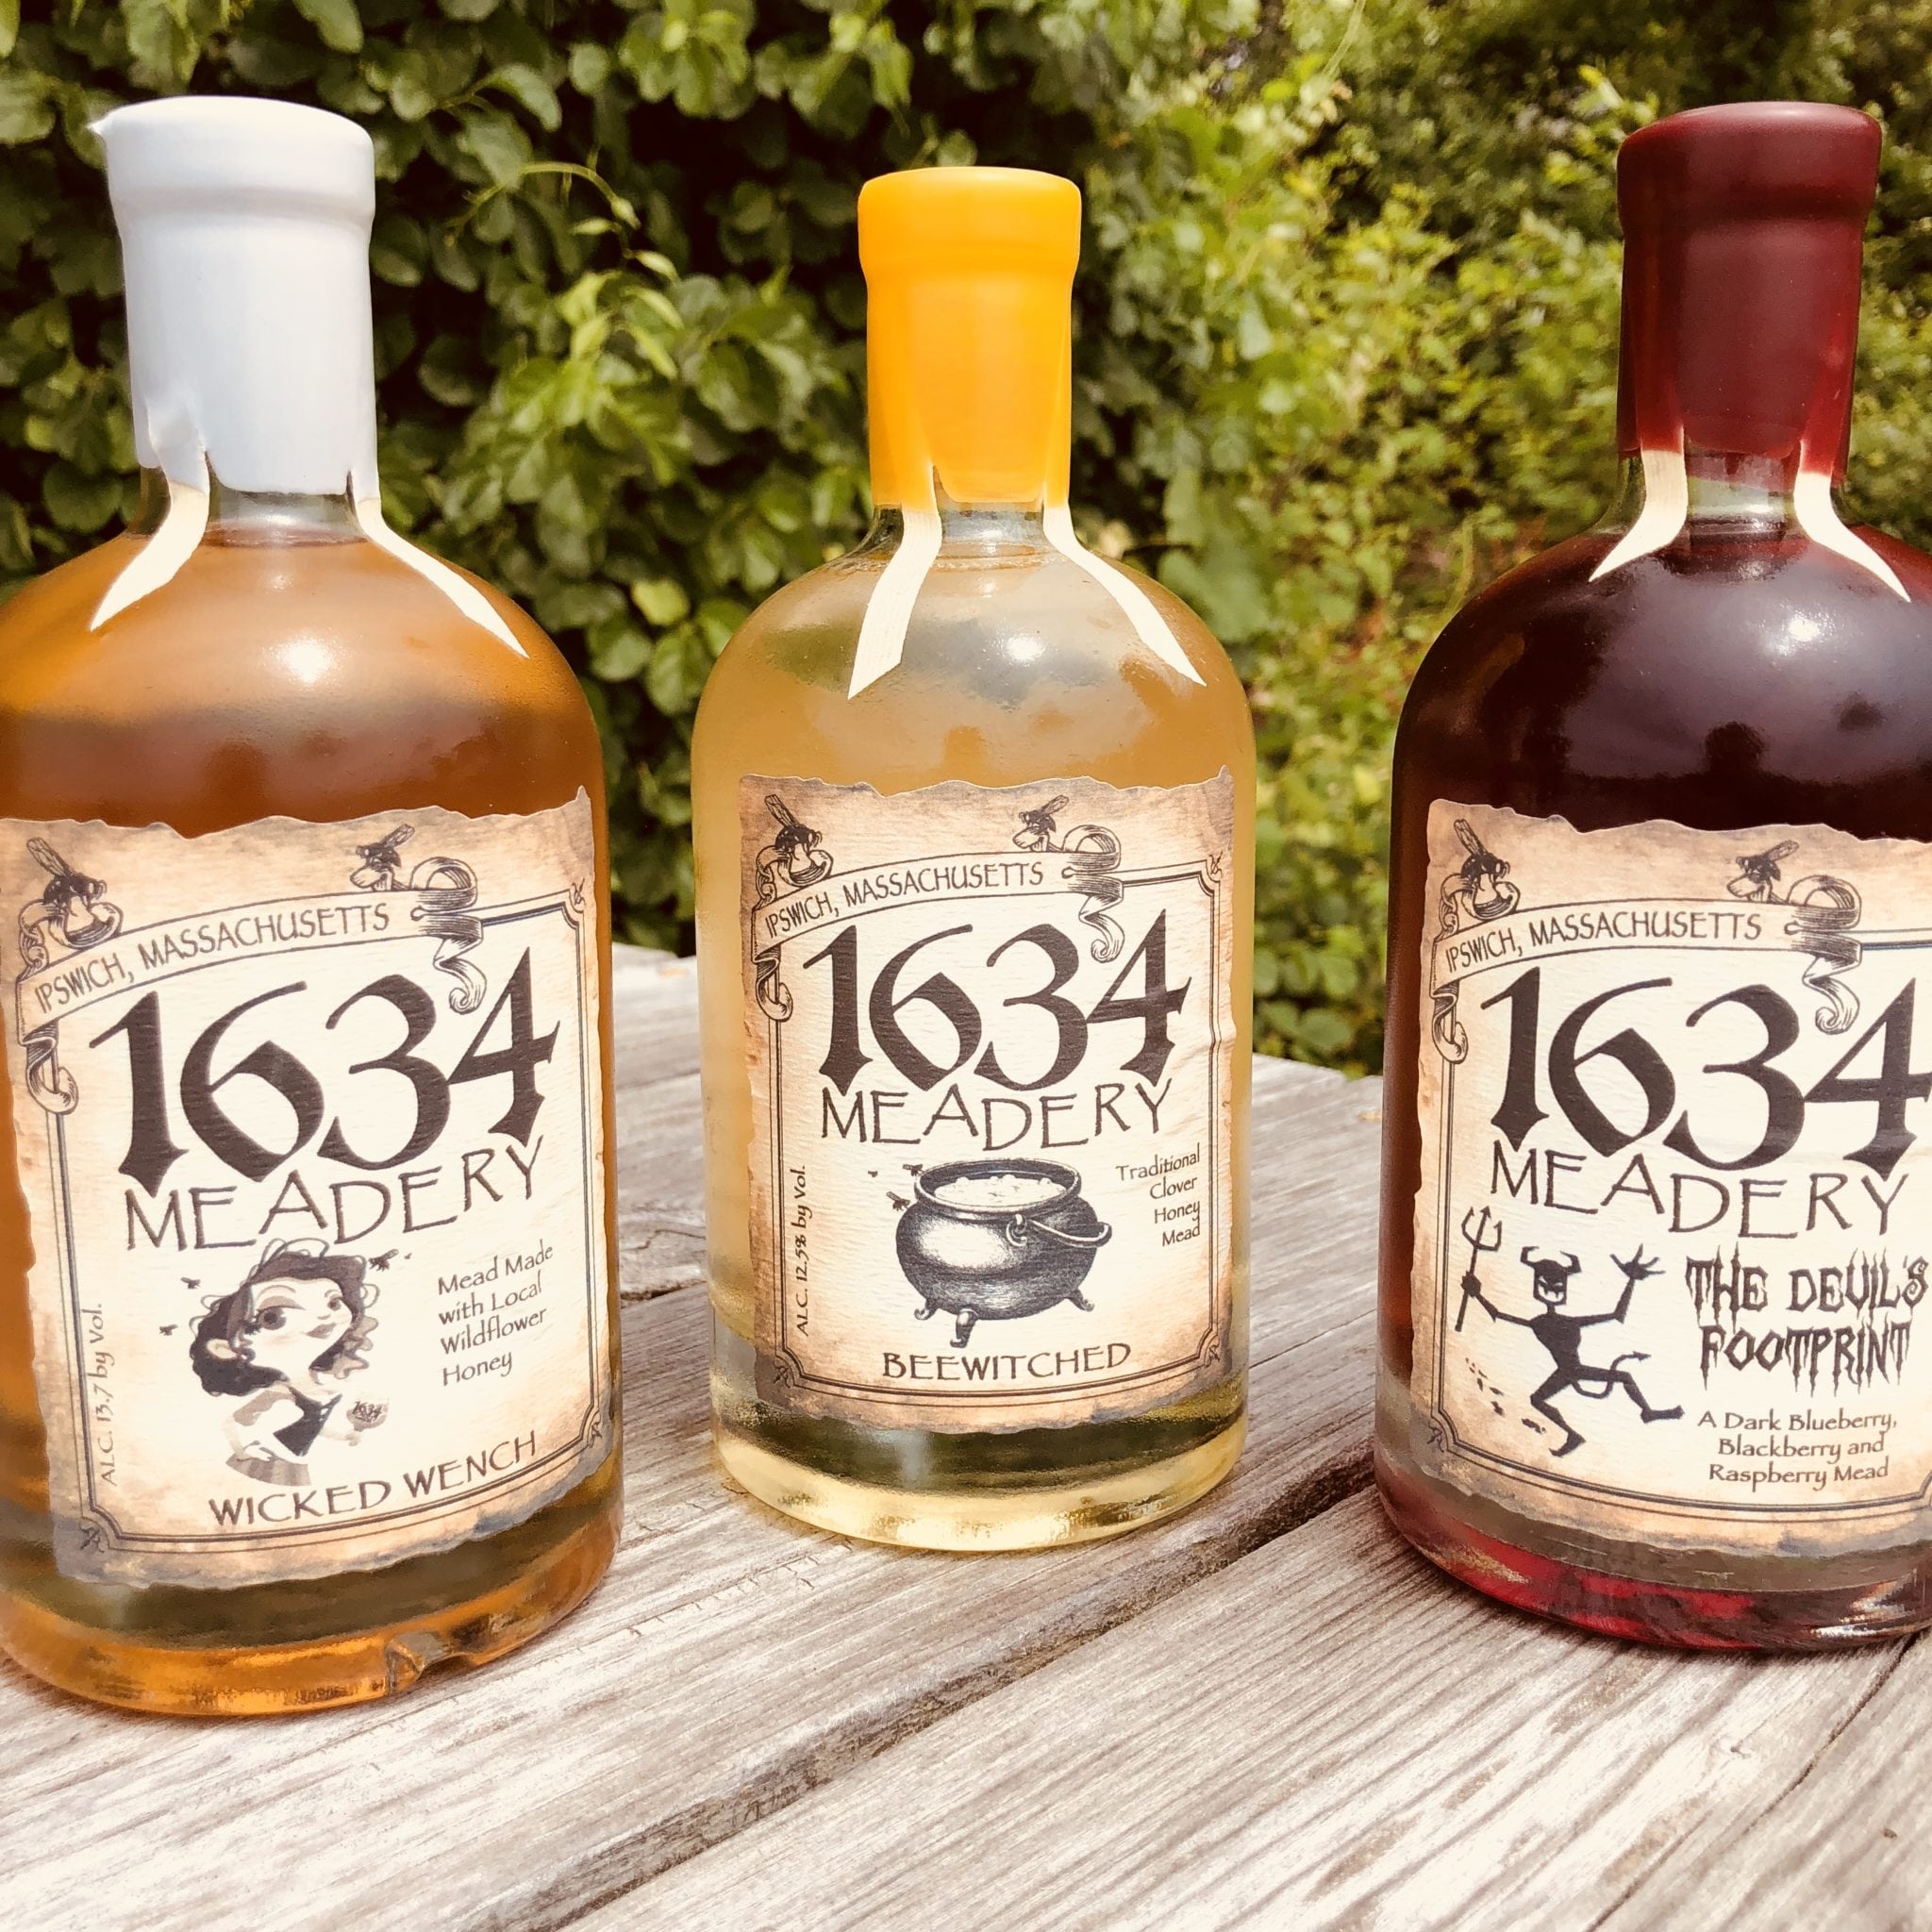 1634 Meadery Meads